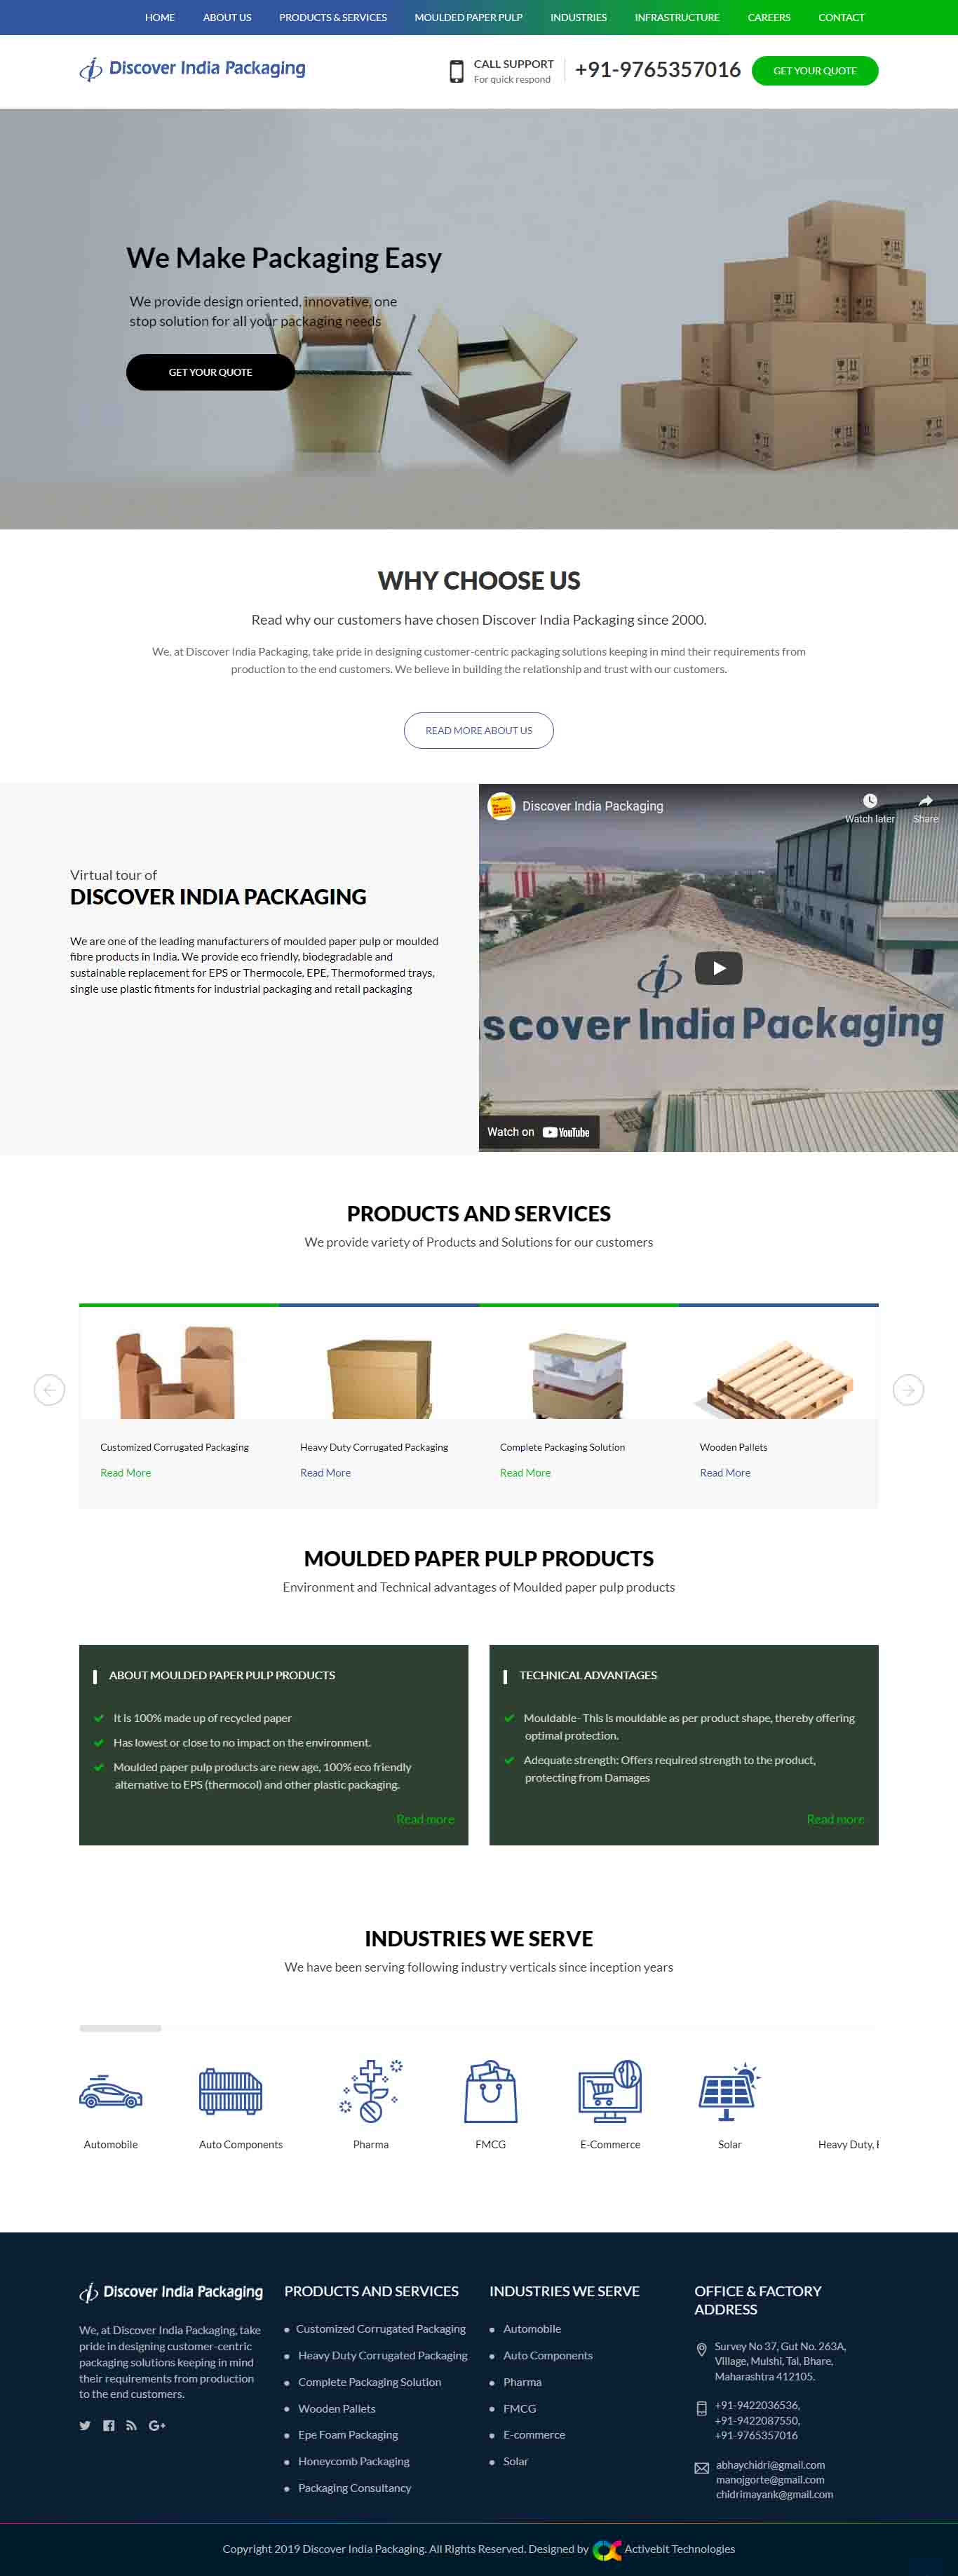 Discover India Packaging website design services